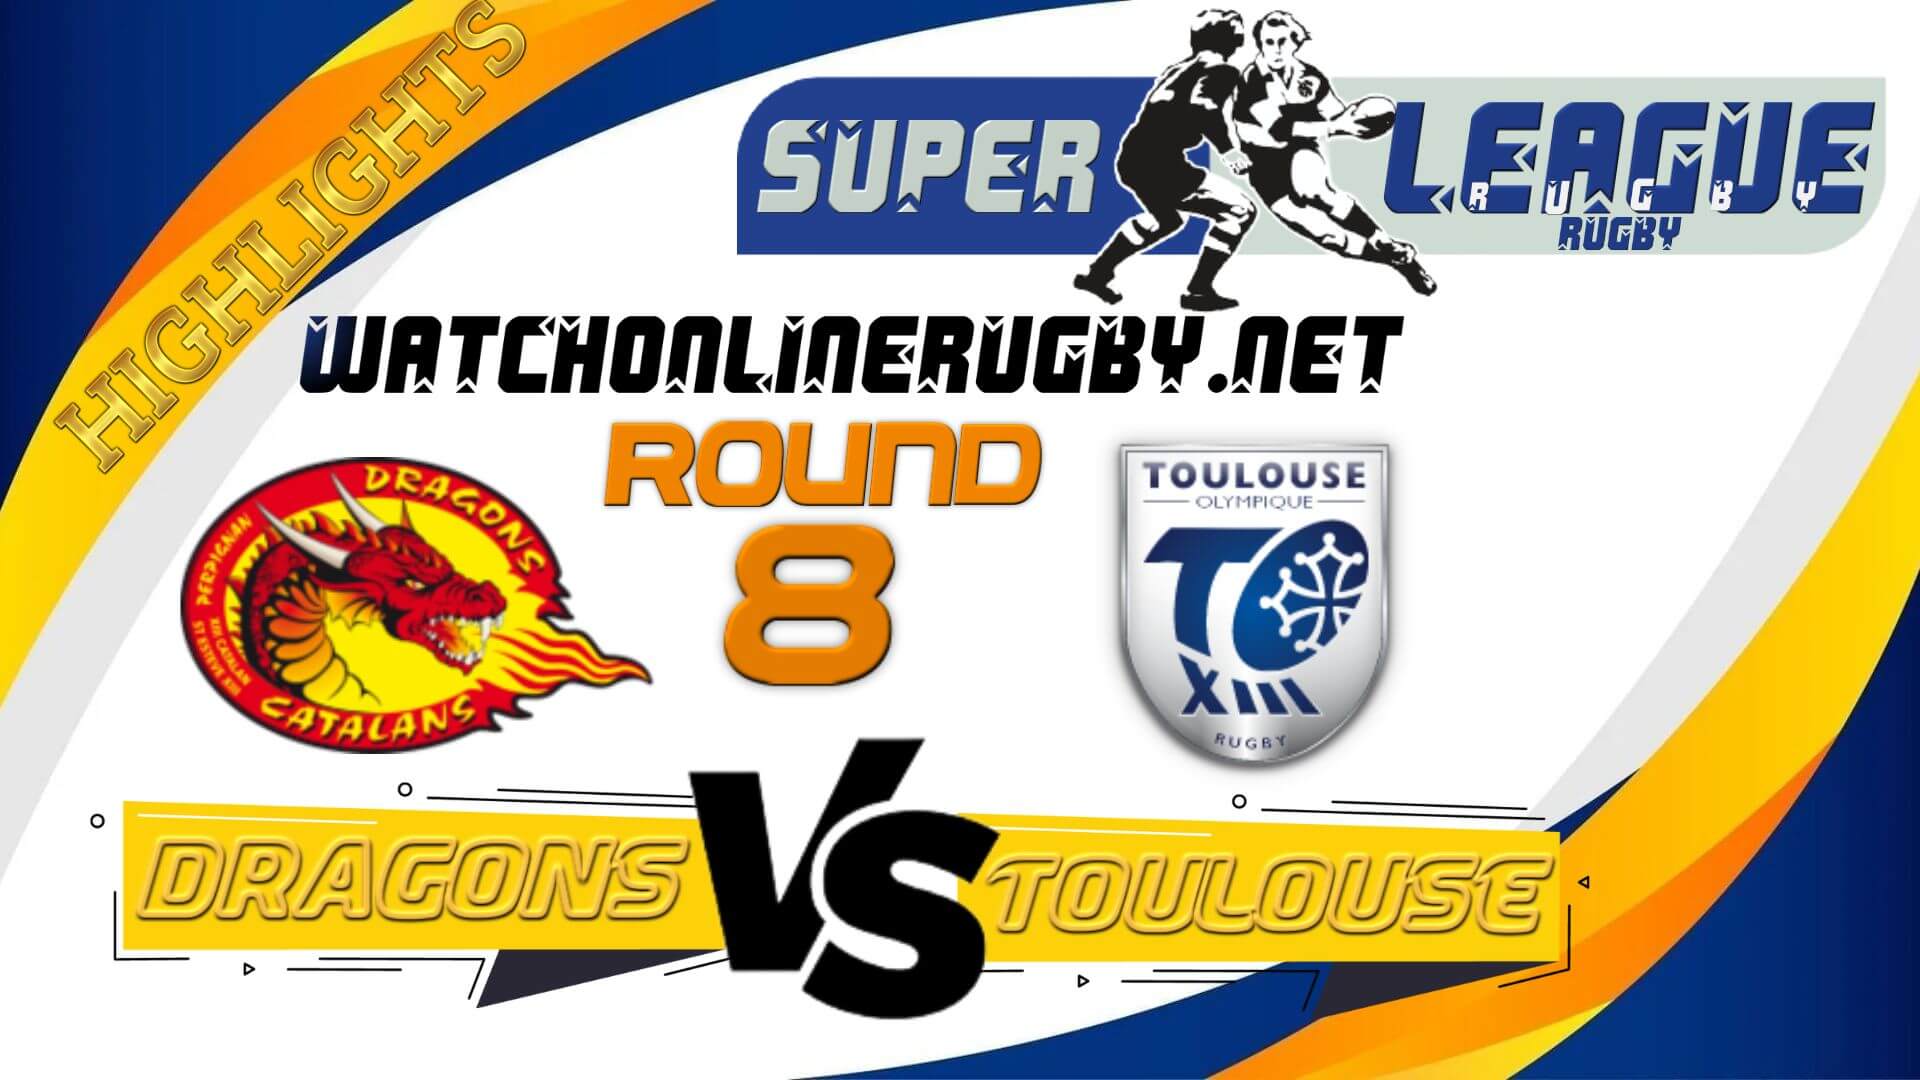 Catalans Dragons Vs Toulouse Super League Rugby 2022 RD 8